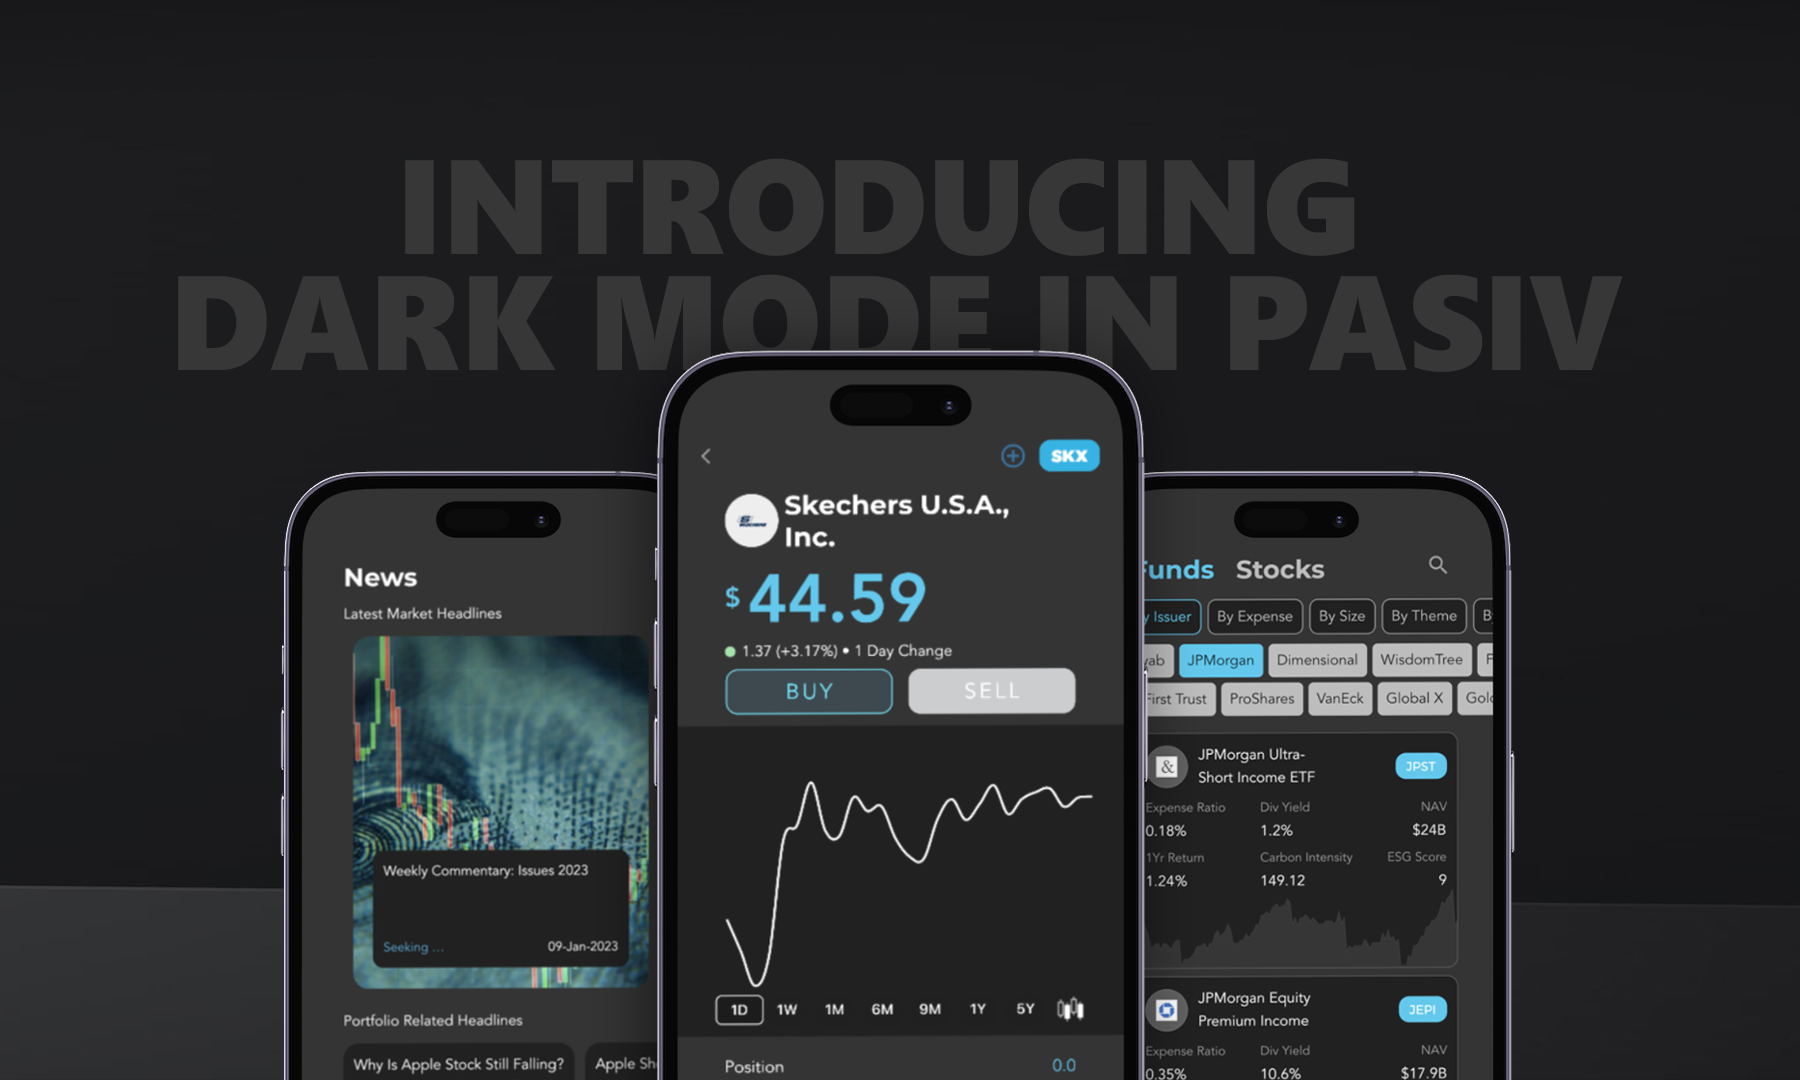 Say Hello to the Darkside - Introducing Dark Mode